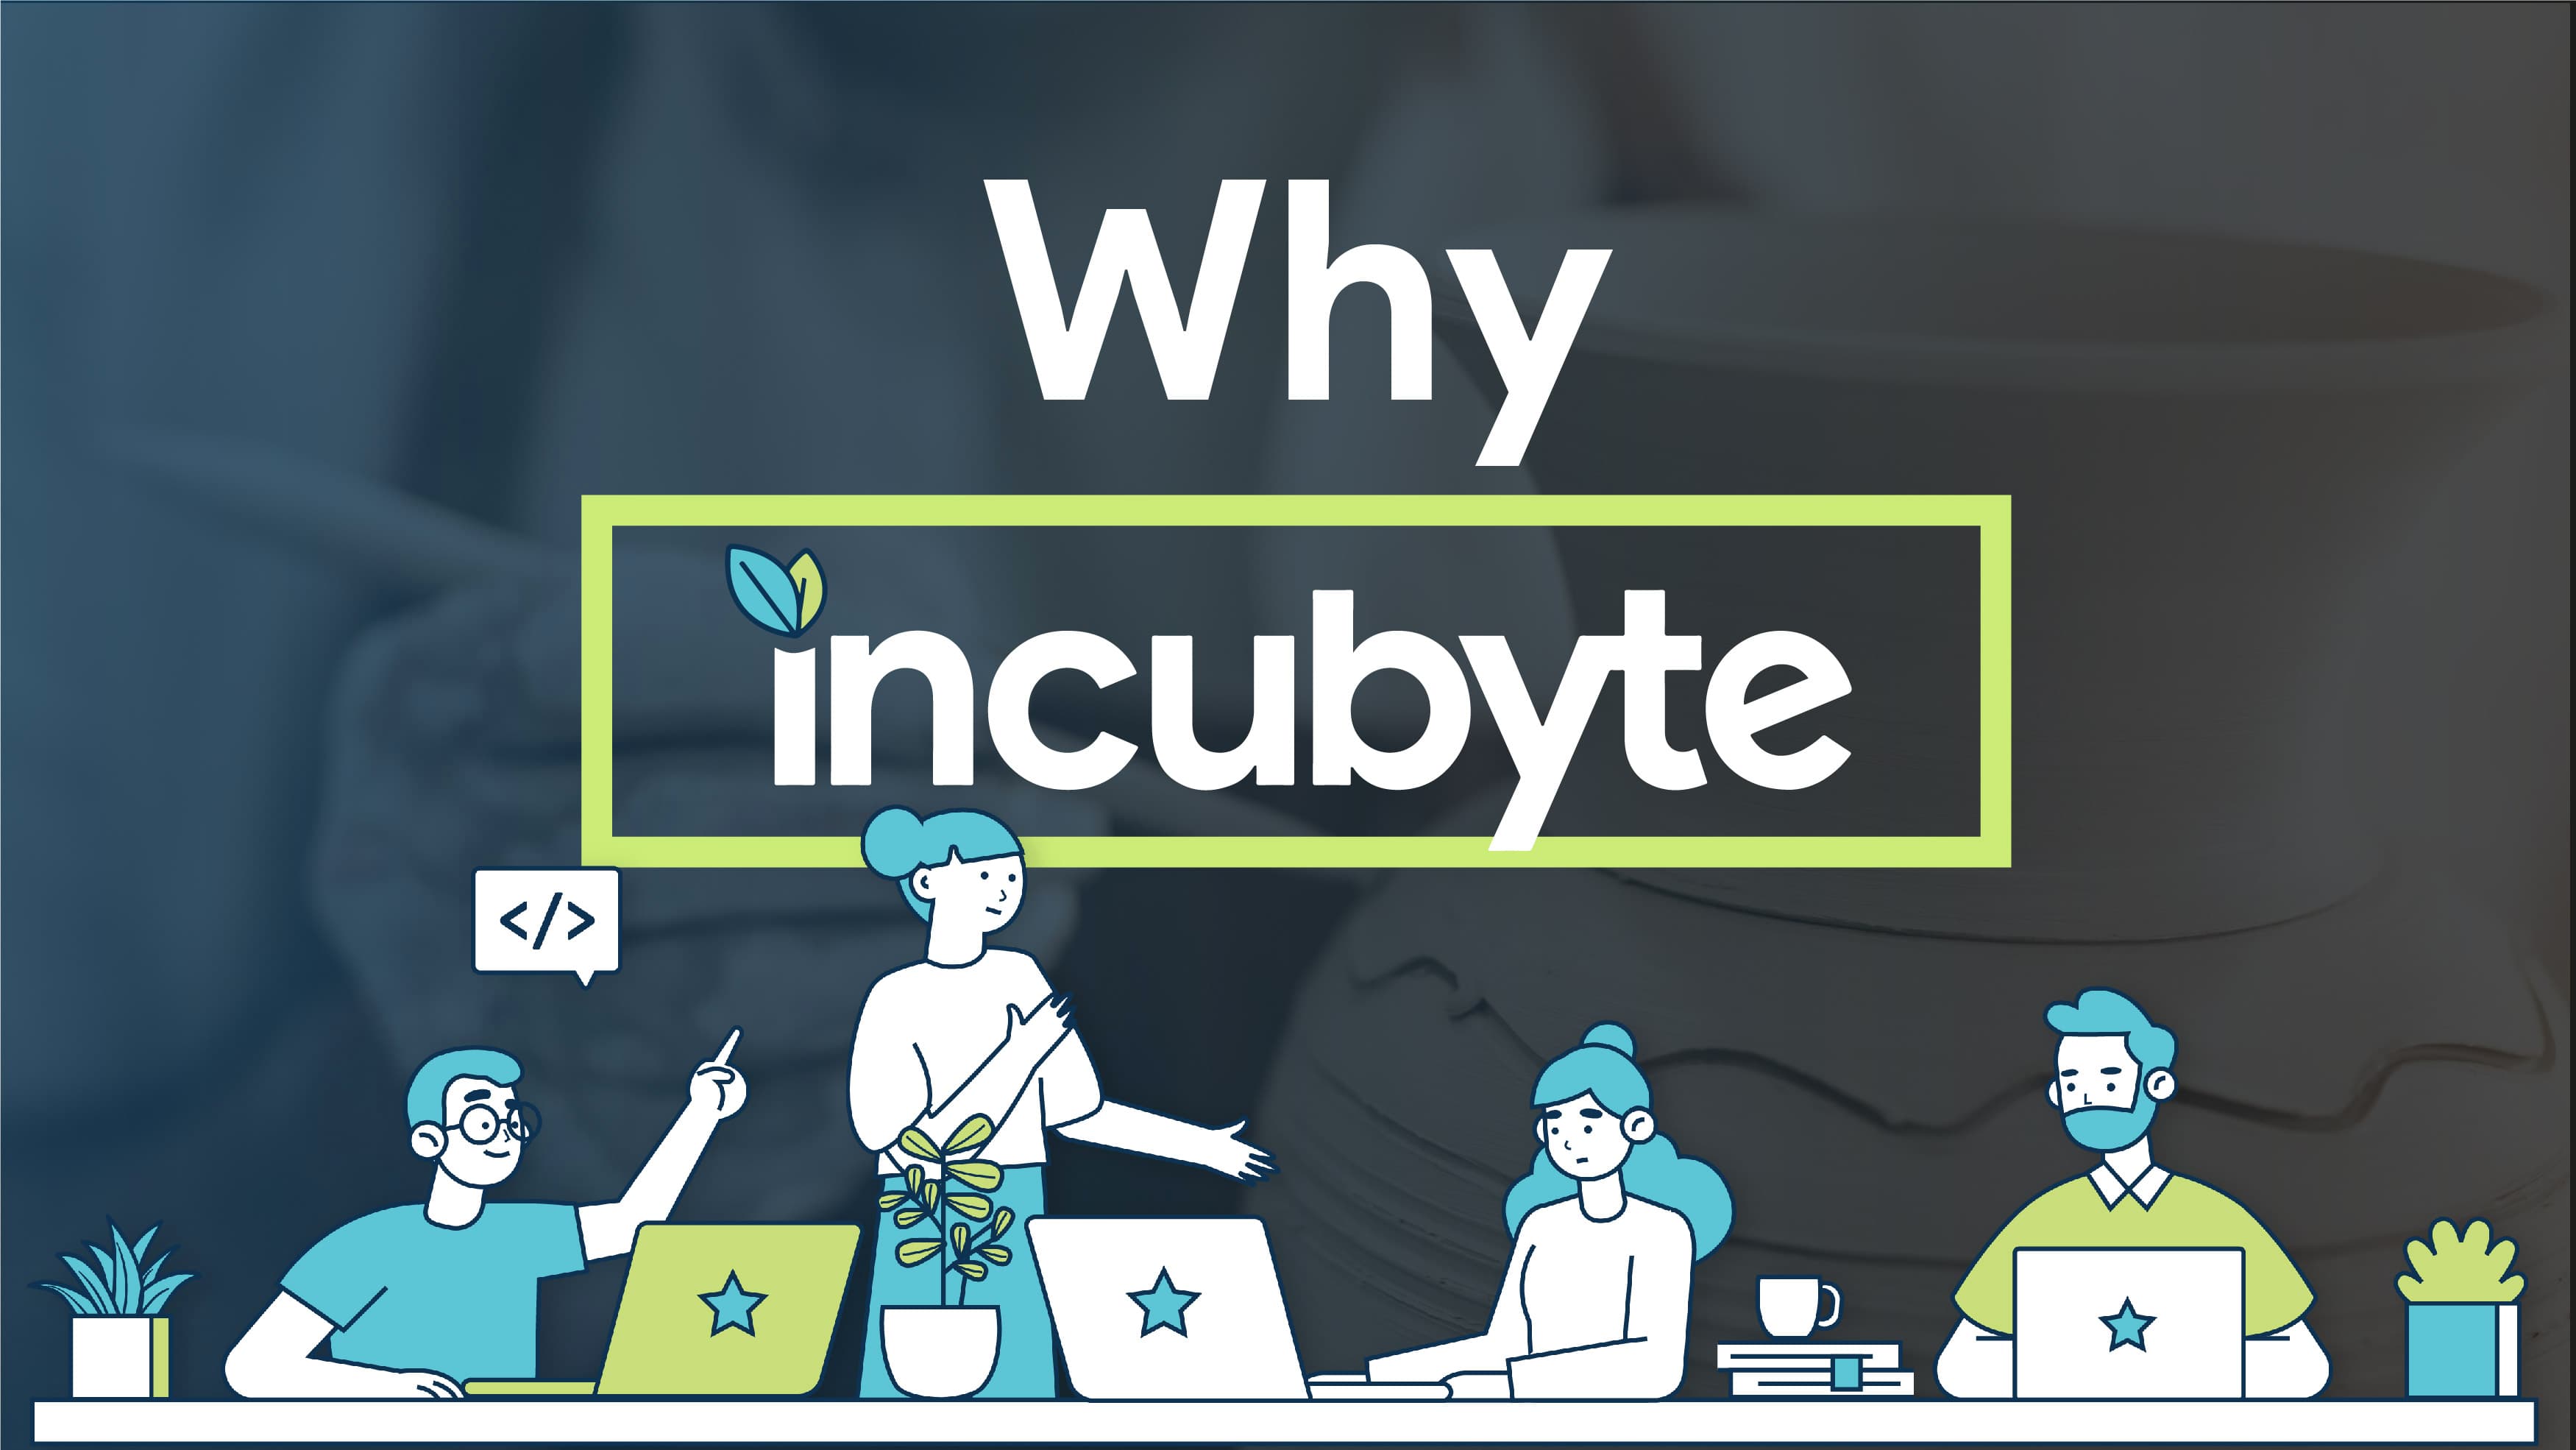 Why Incubyte?